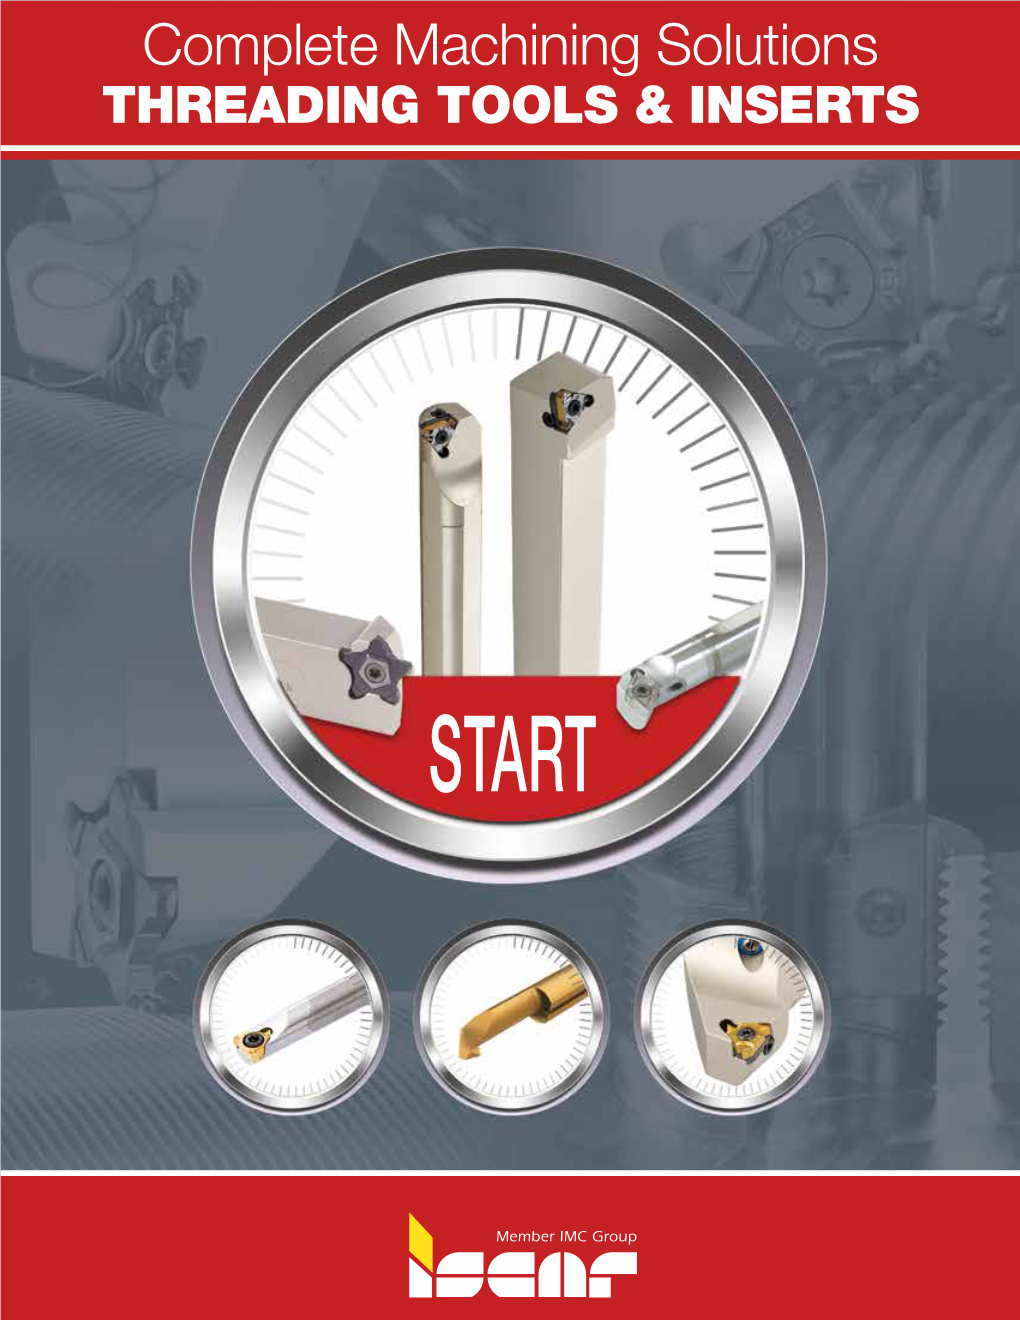 Complete Machining Solutions THREADING TOOLS & INSERTS